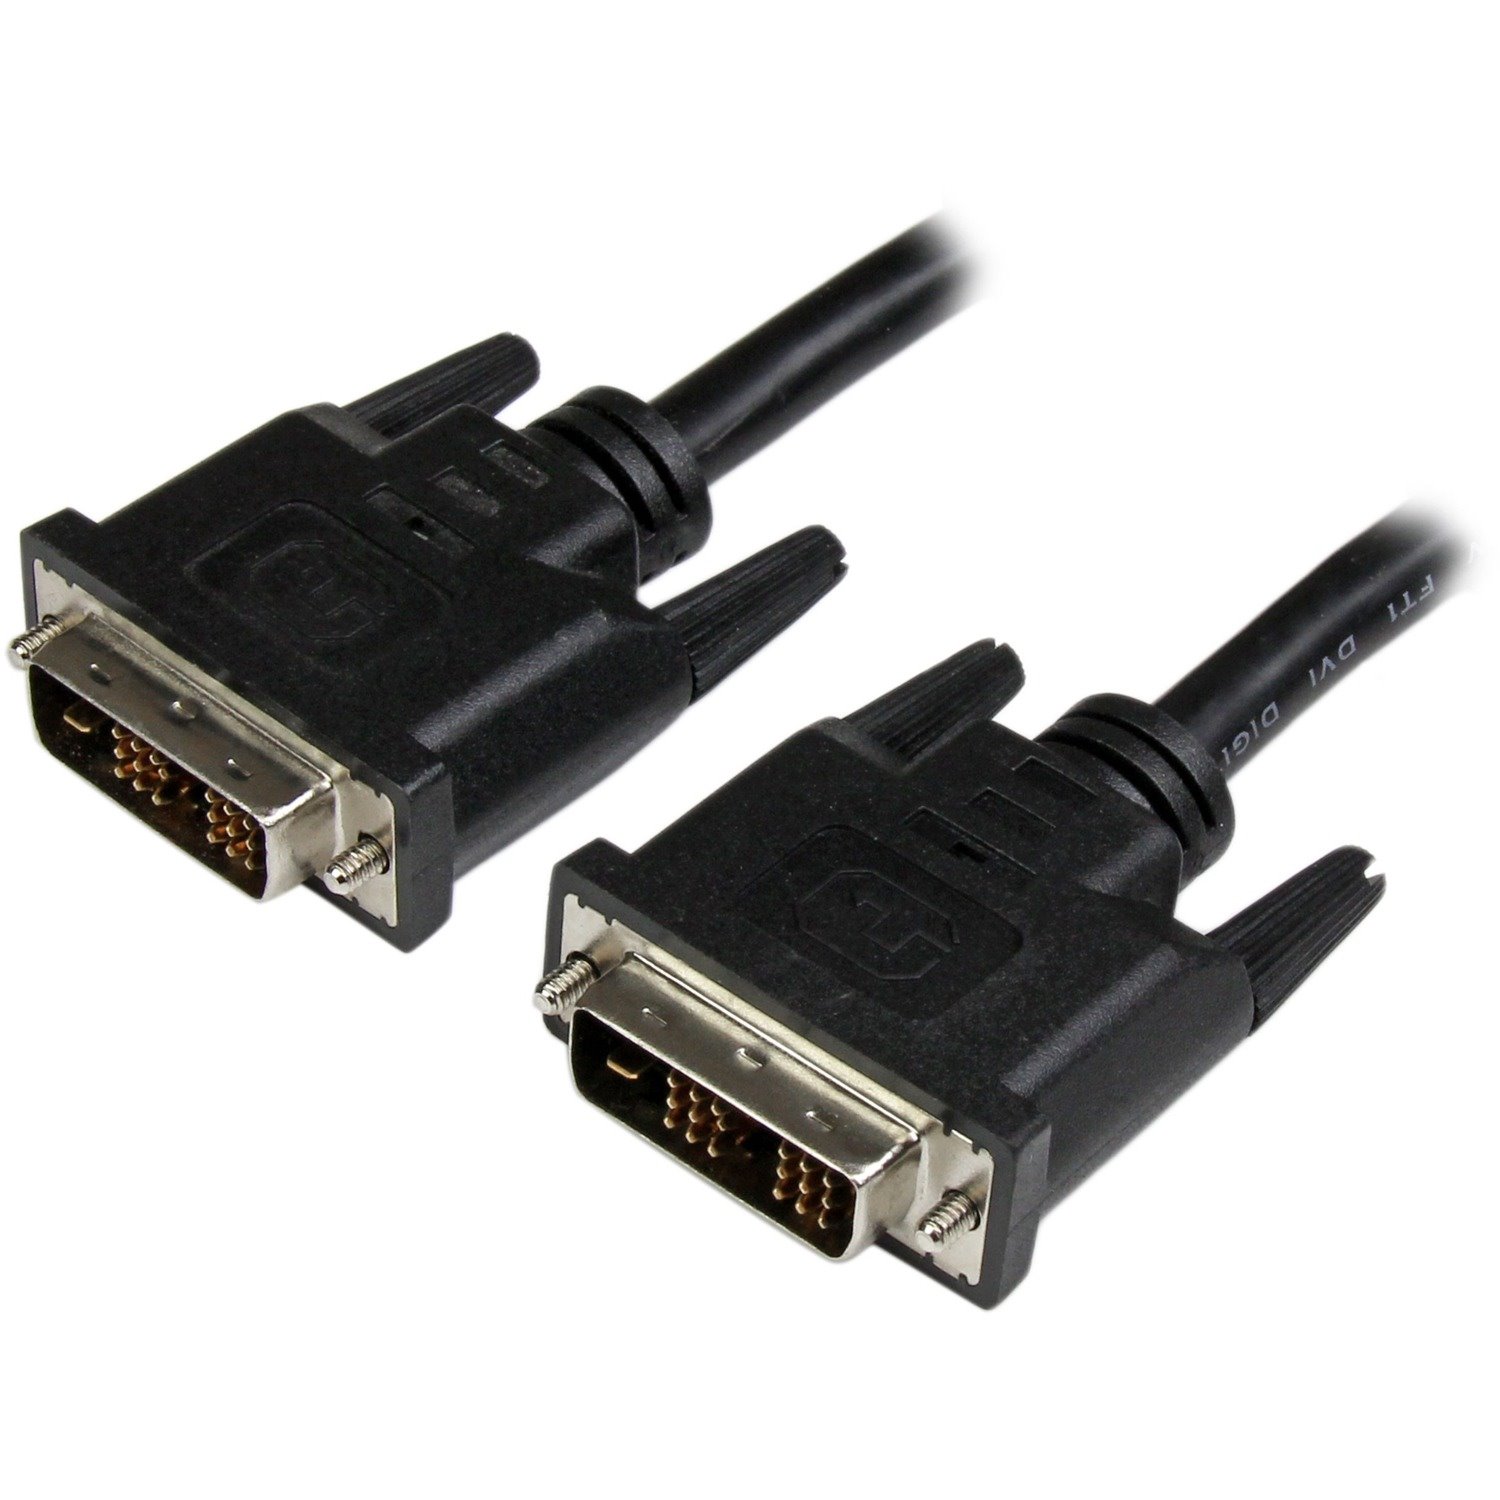 StarTech.com 91.44 cm DVI Video Cable for Projector, Video Device, Monitor, Notebook, Desktop Computer - 1